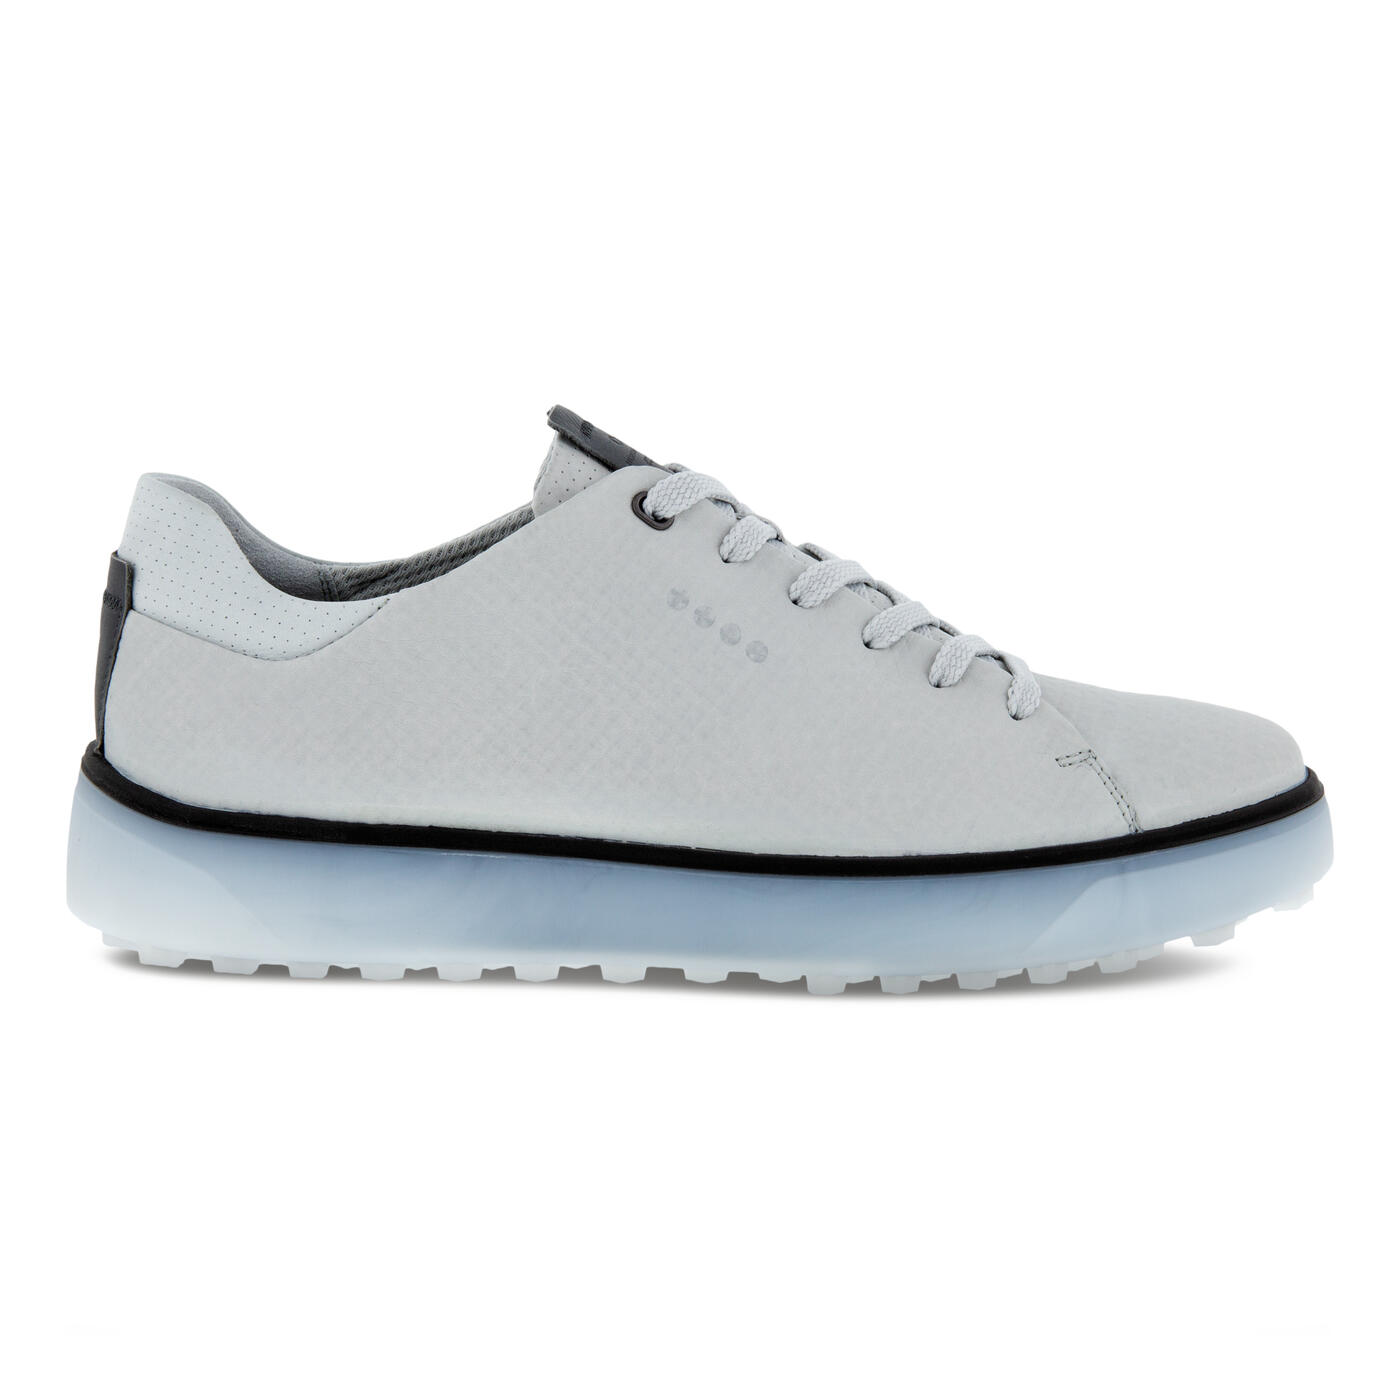 UPC 194890591547 product image for ECCO Men's Golf Tray Shoe Size 12 Leather Concrete | upcitemdb.com